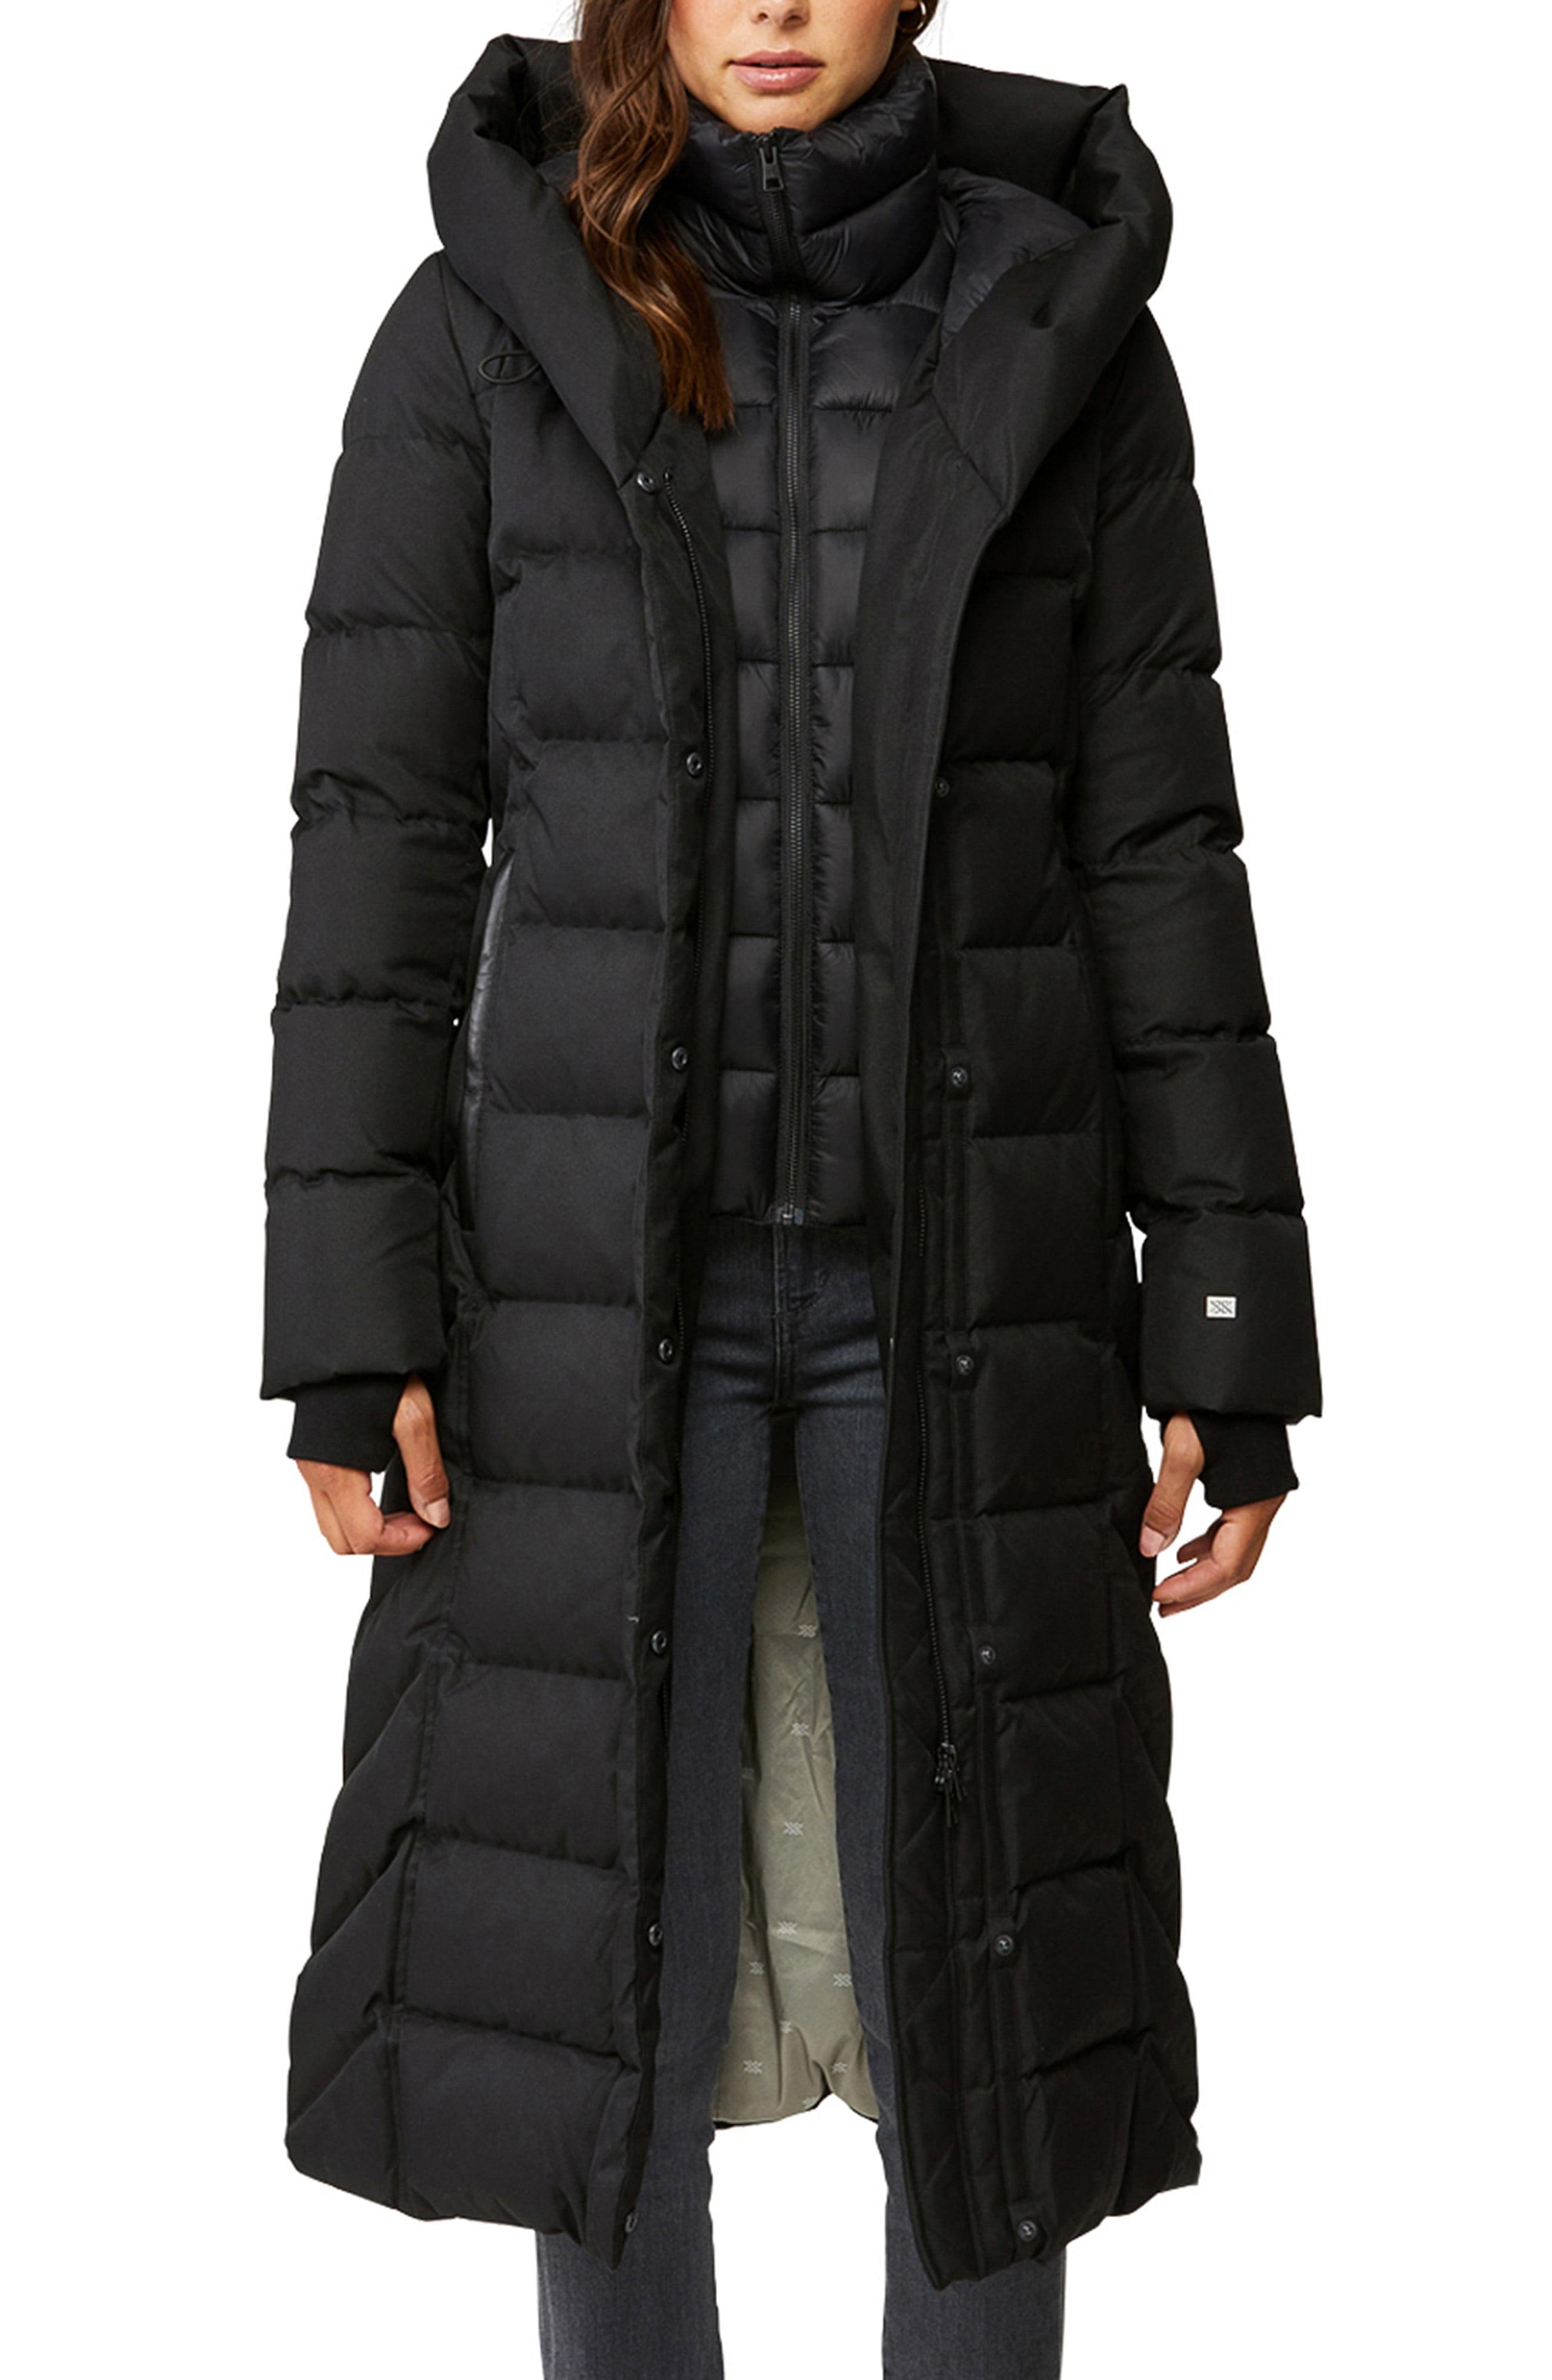 SOIA & KYO Talyse Water Repellent Down Puffer Coat With Bib in Black - Lyst